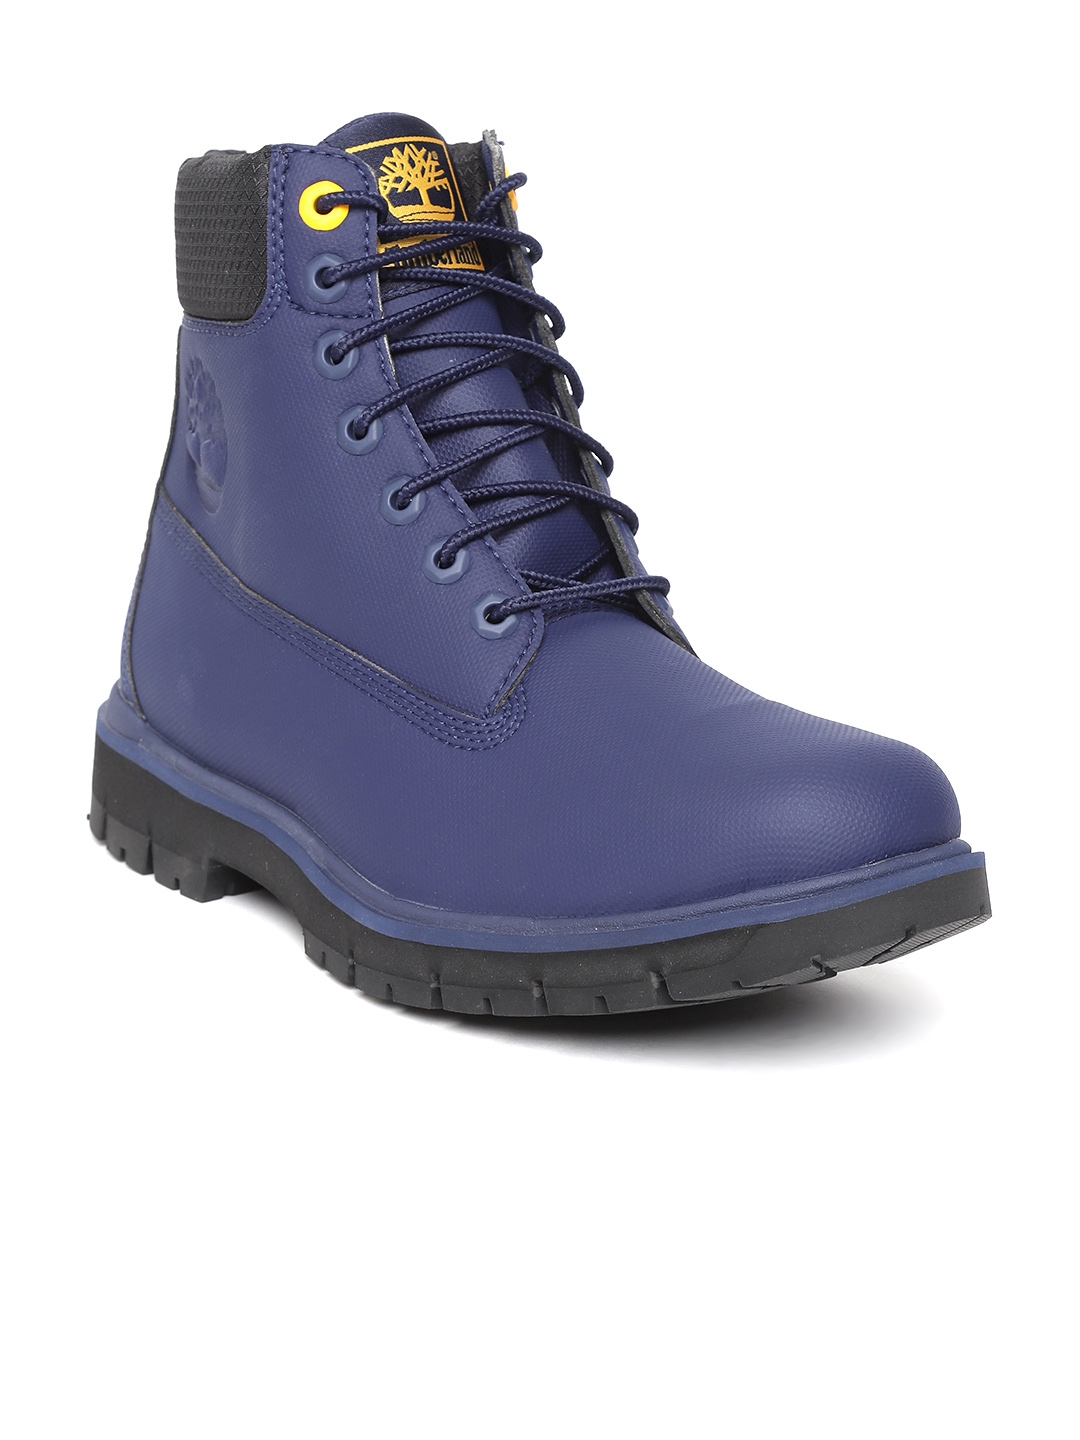 timberland shoes navy blue